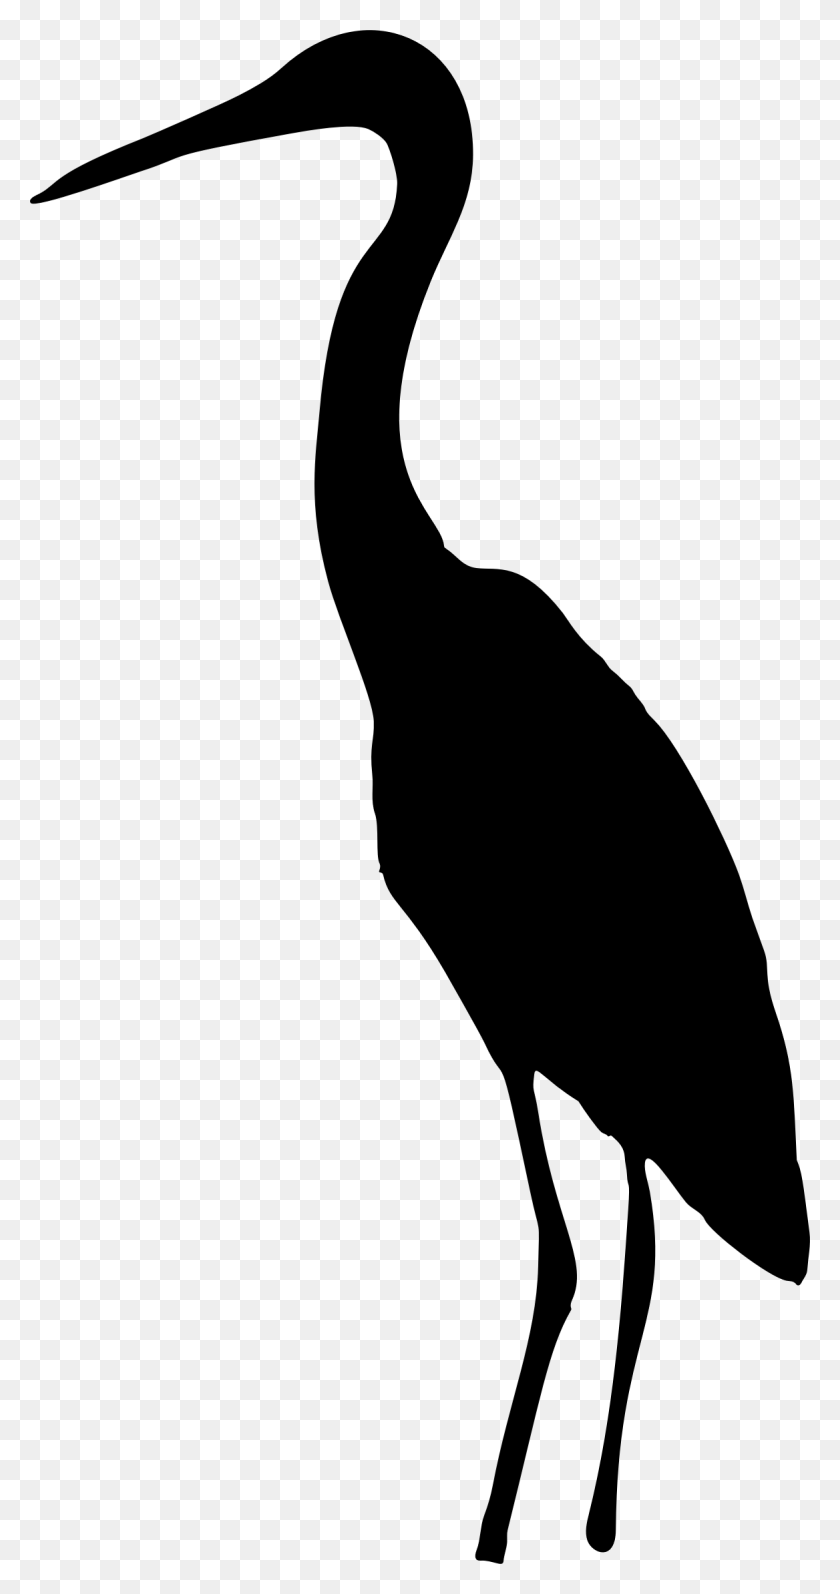 Clipart - Heron Clipart – Stunning free transparent png clipart images ...